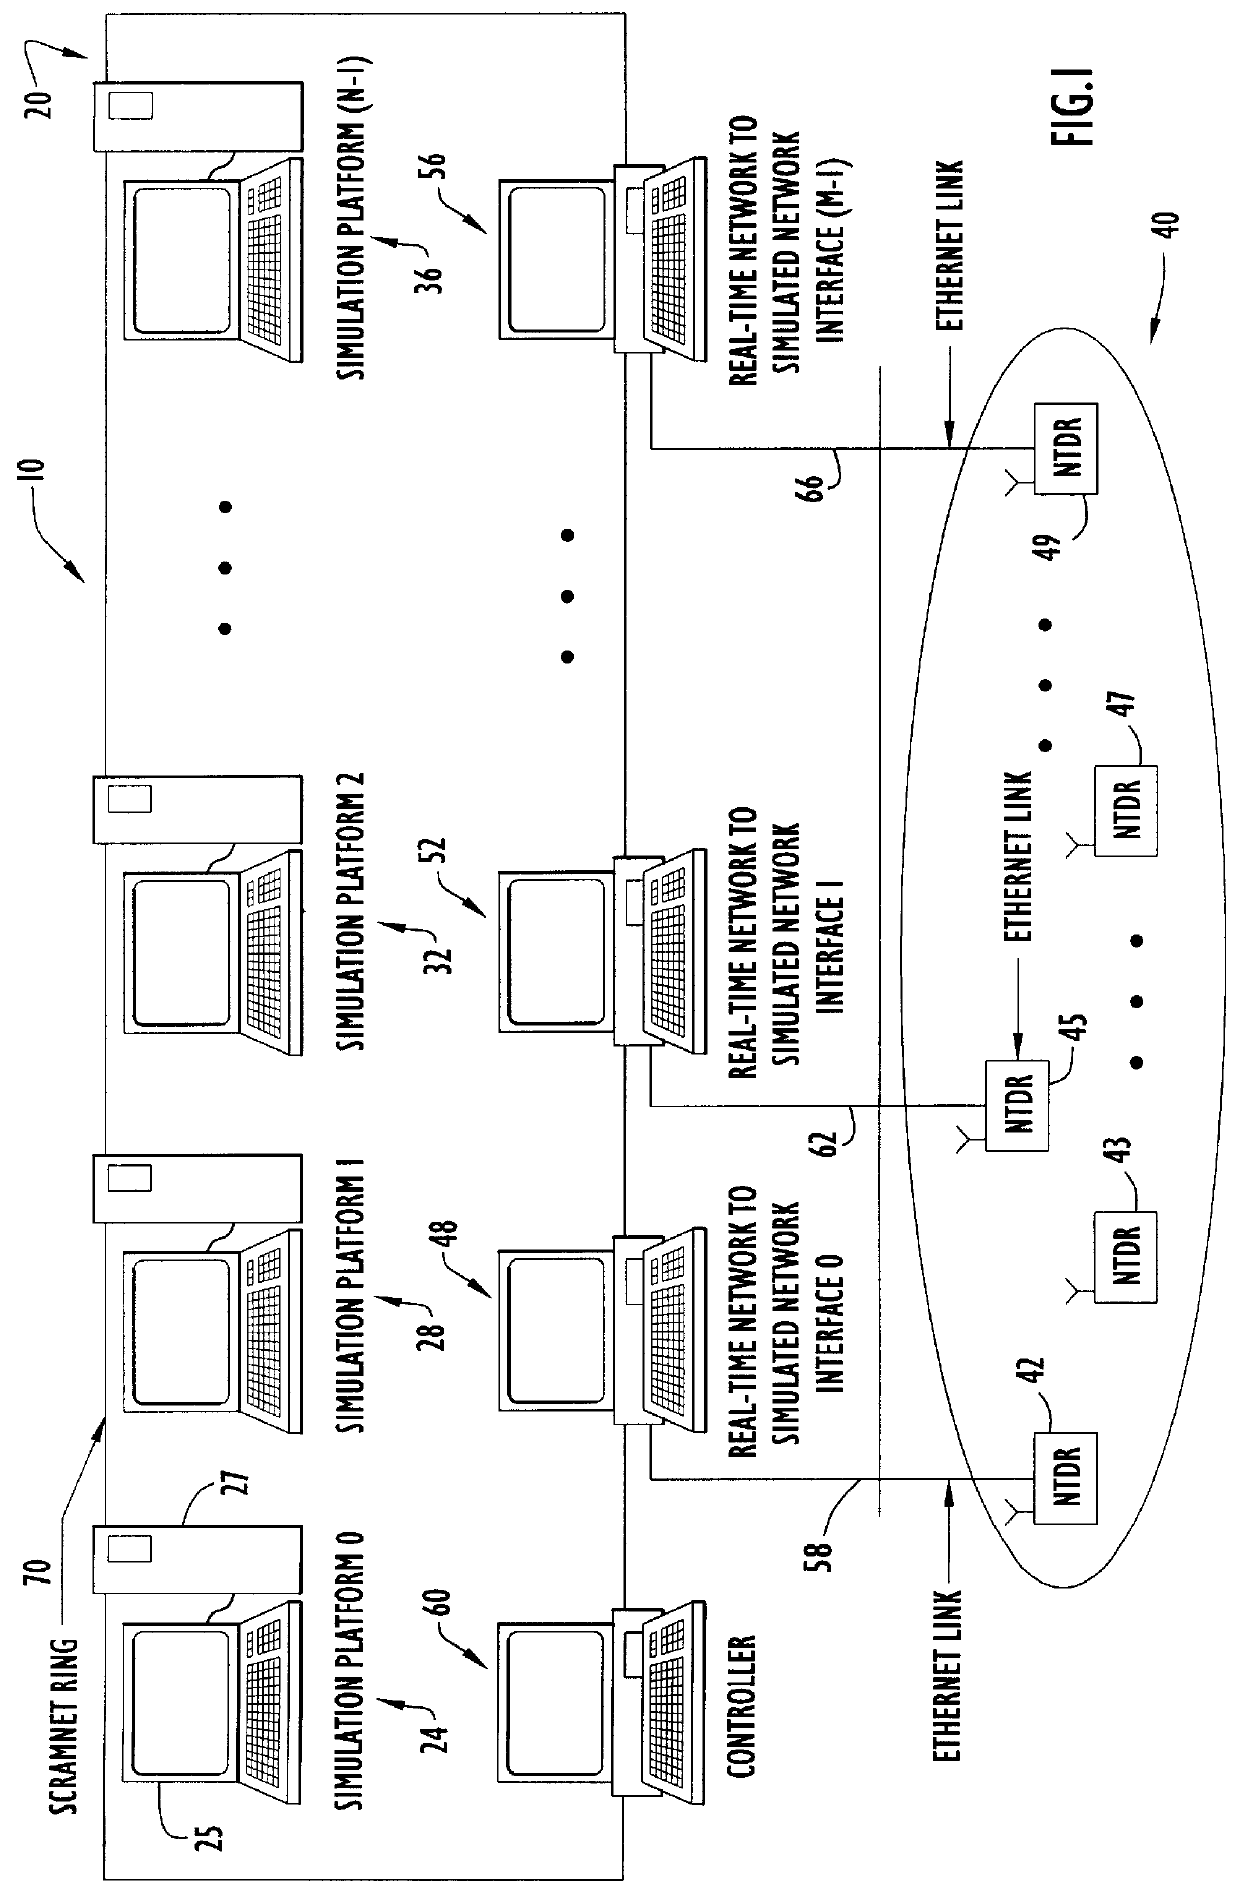 Large-scale network simulation method and apparatus